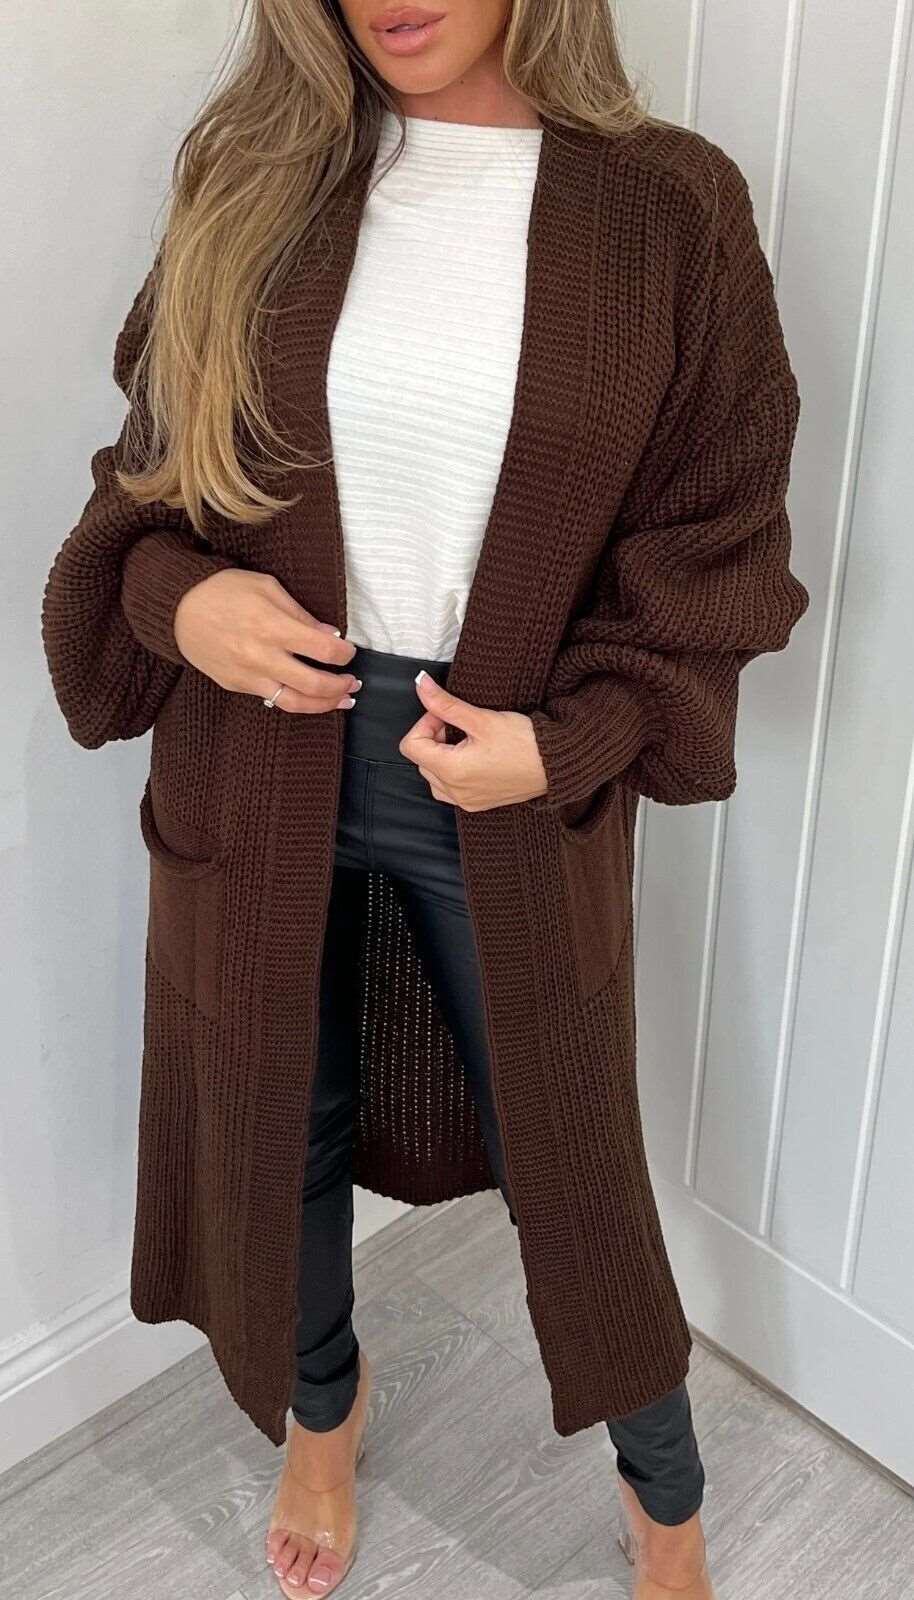 Chic Knit Pocket Cardigan: Cozy Mid-length Sweater